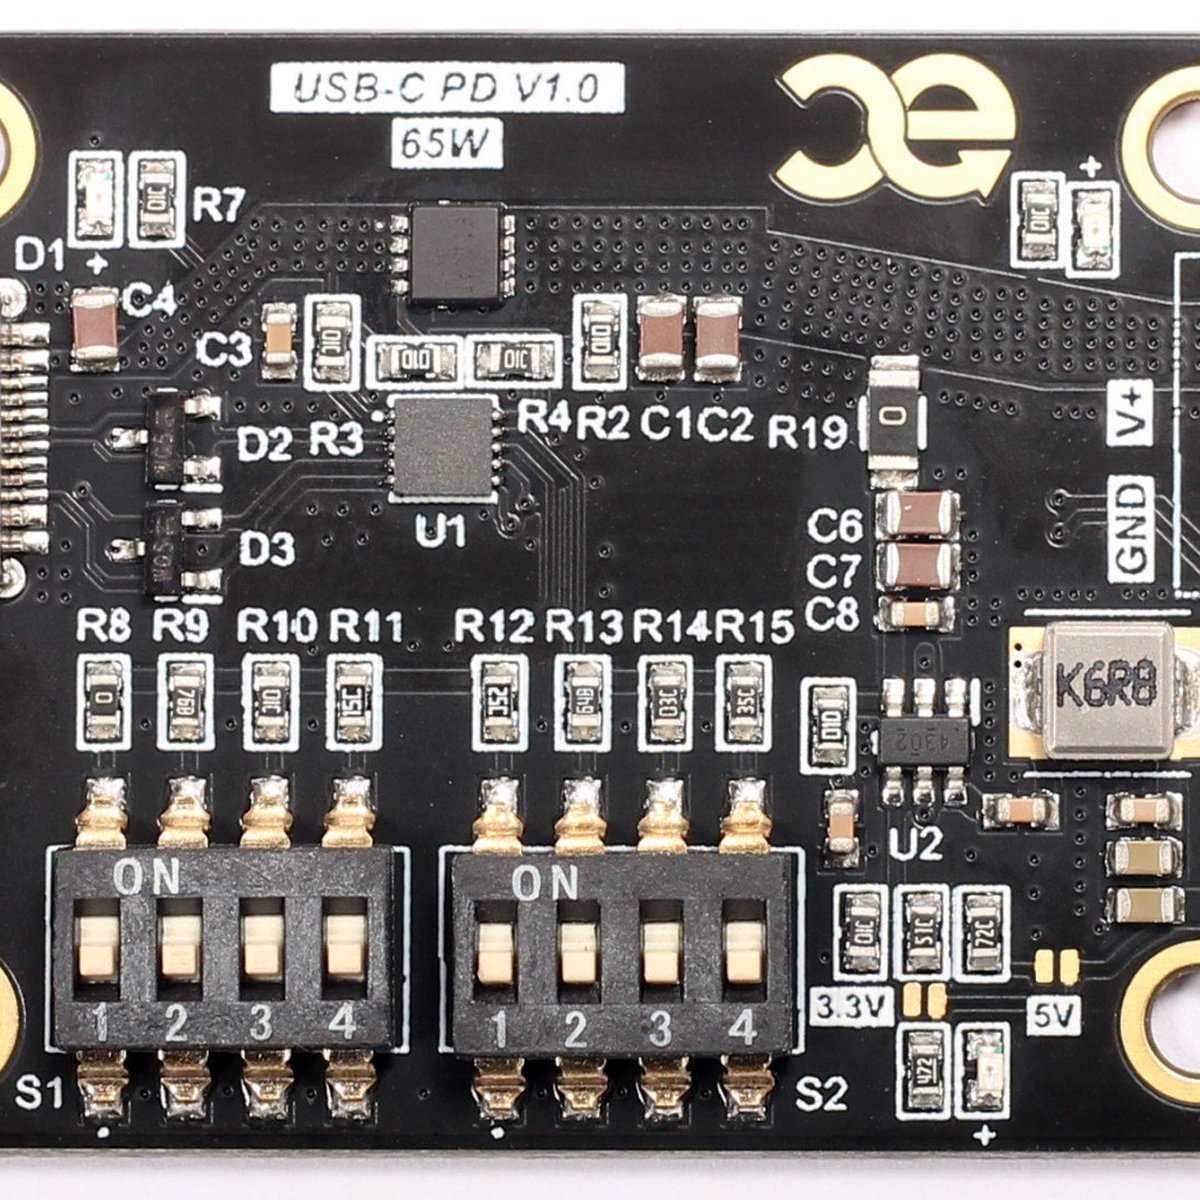 MAKERPALS Board USB-C Power PD Tindie from Delivery on 65W